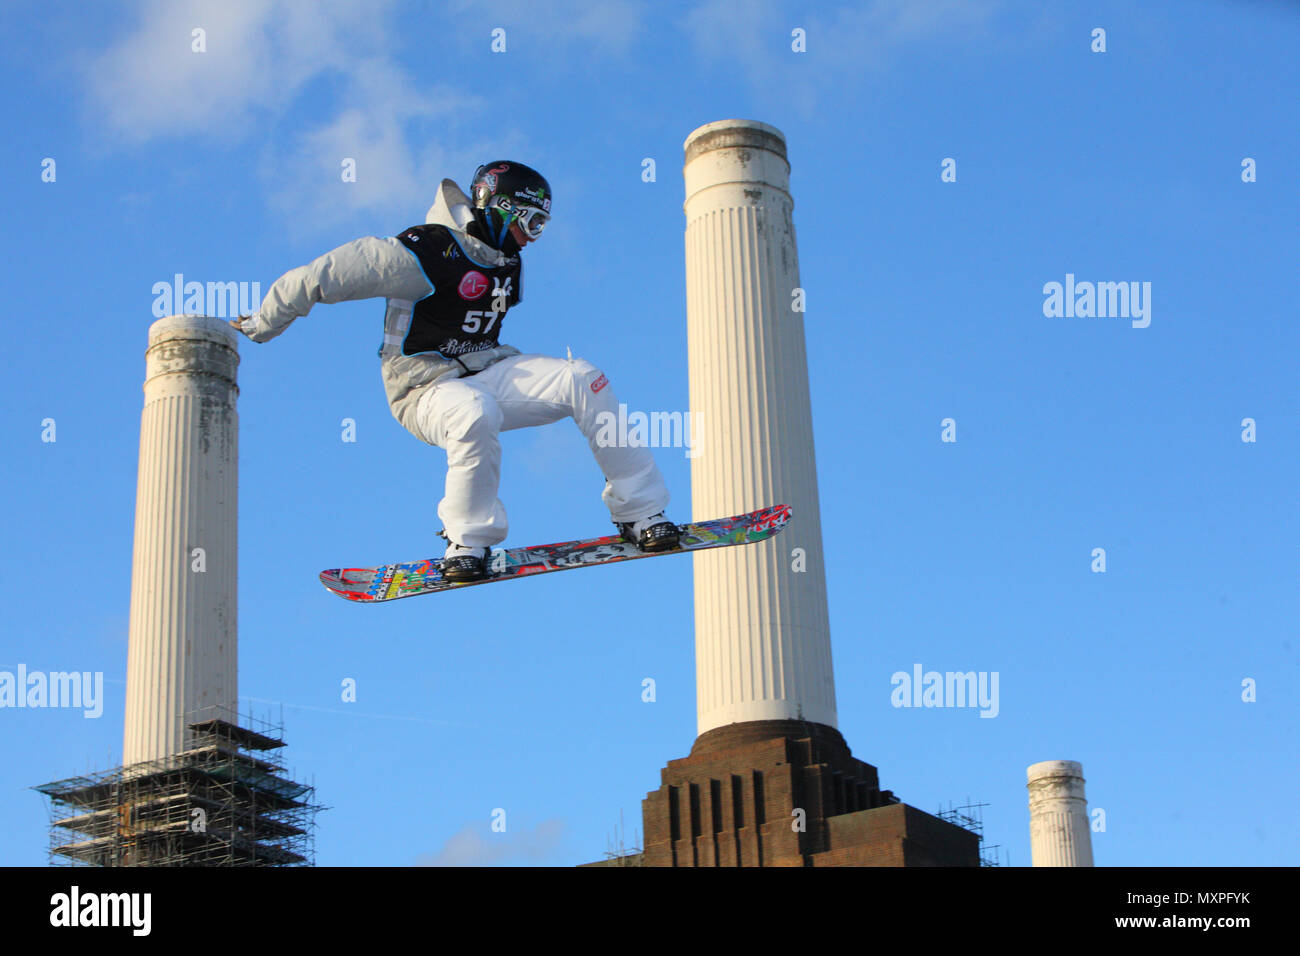 Relentless Freeze Festival 2010, Snowboard, Ski and Music at Battersea Power Station, 30 October 2010 Stock Photo